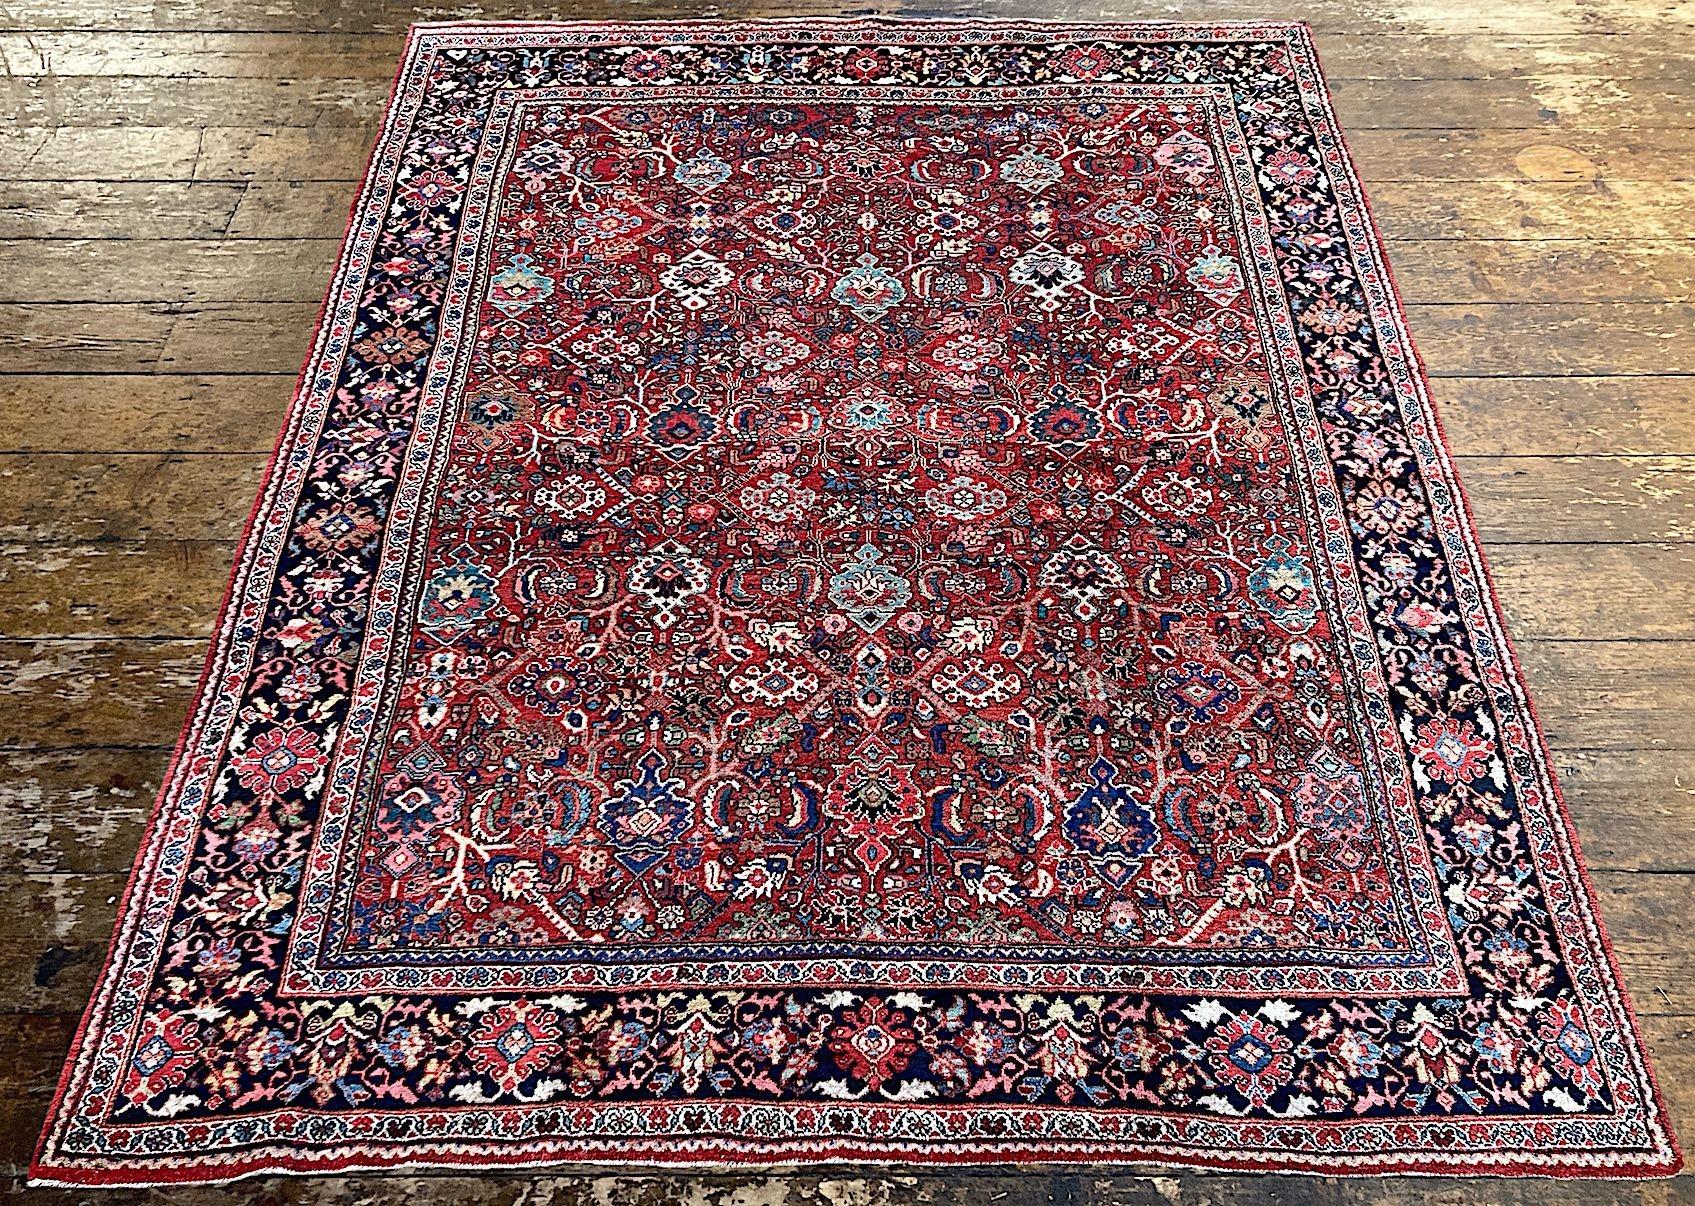 Early 20th Century Antique Mahal Carpet 3.63m x 2.81m For Sale